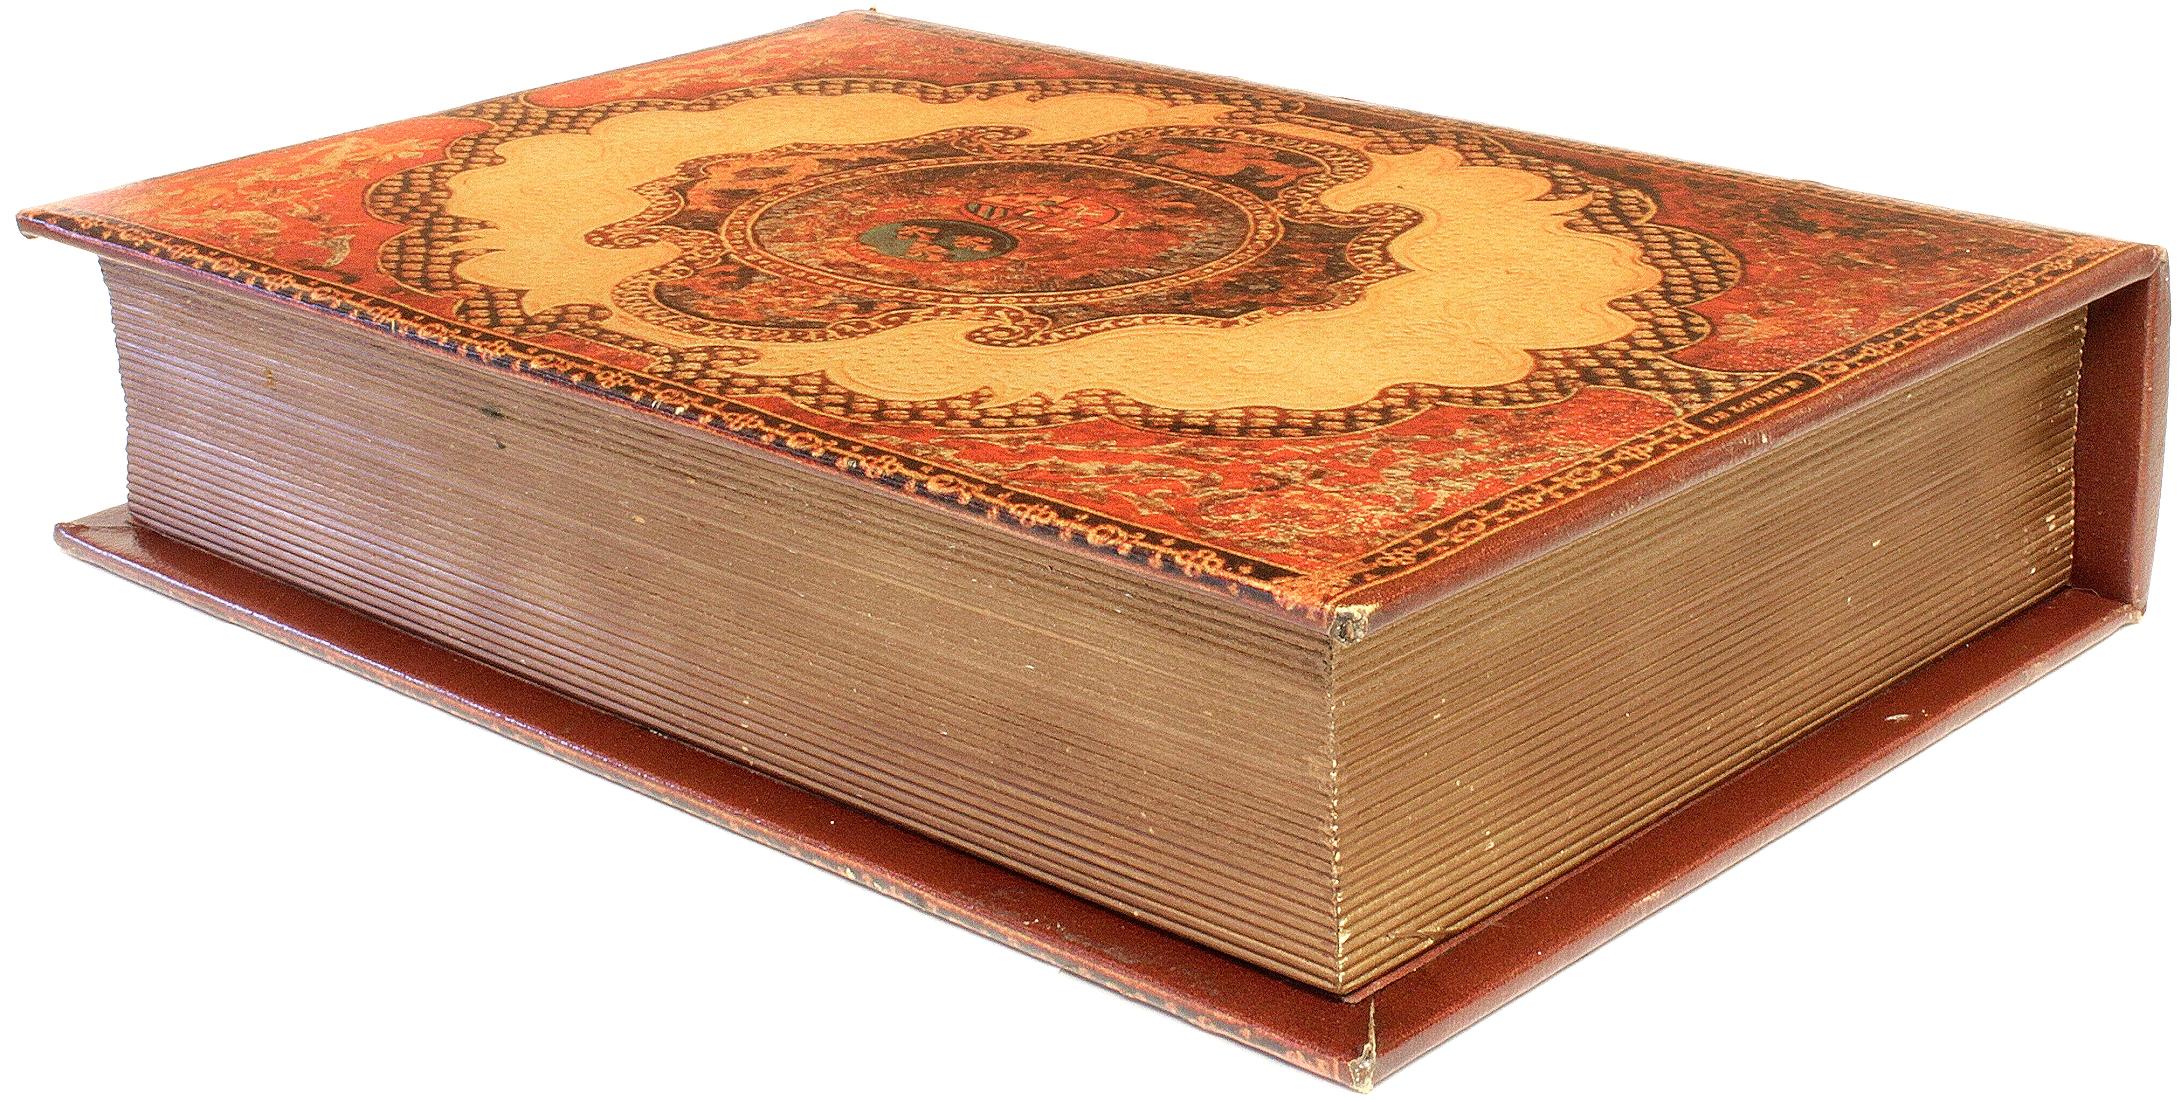 Large book box in the style of a French binding, 2-3/4